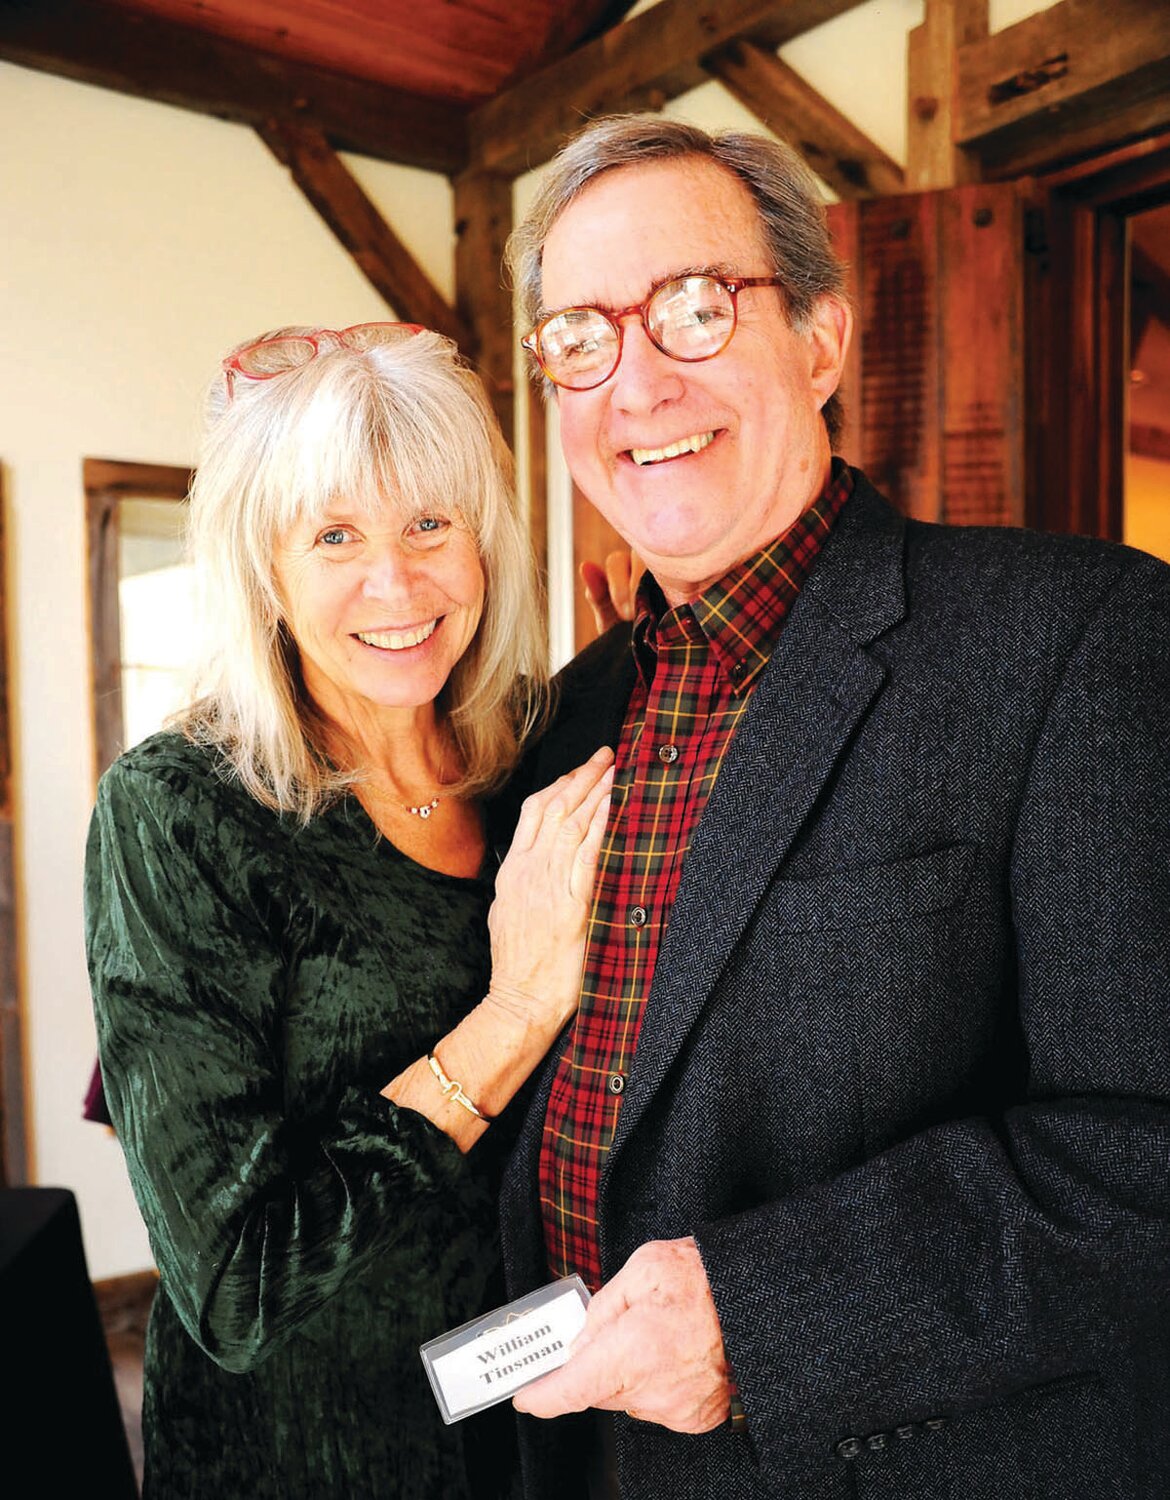 A fixture since 1785 in the riverside community in Solebury, Bill Tinsman, shown here with wife Melody Hunt, died on Aug. 6.